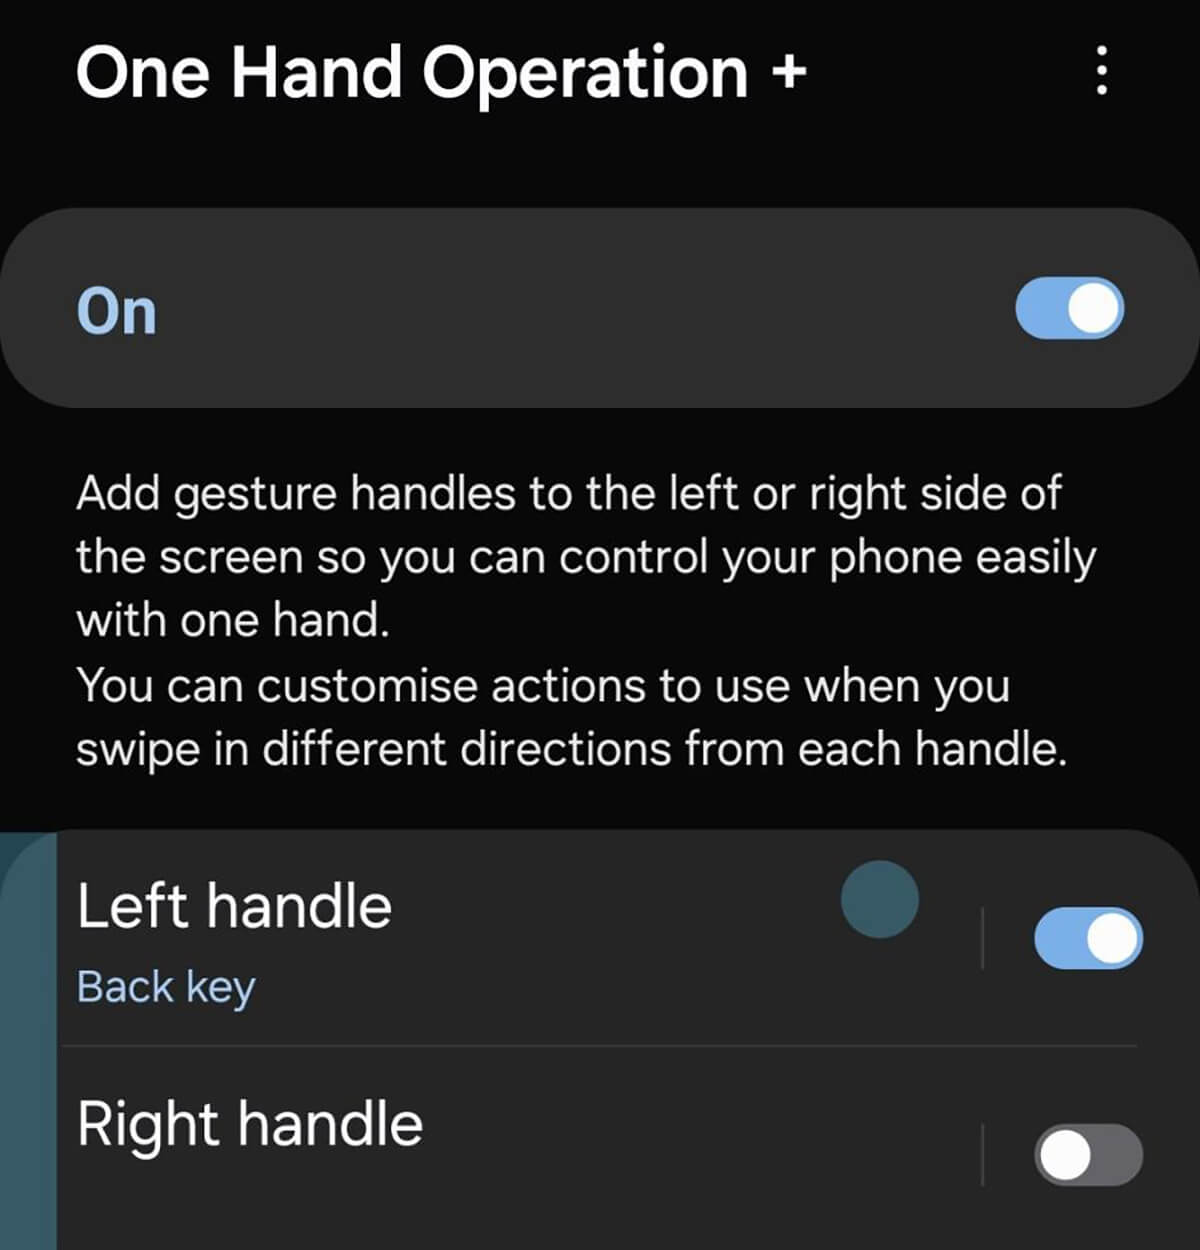 Screenshot from the One Hand Operation + app